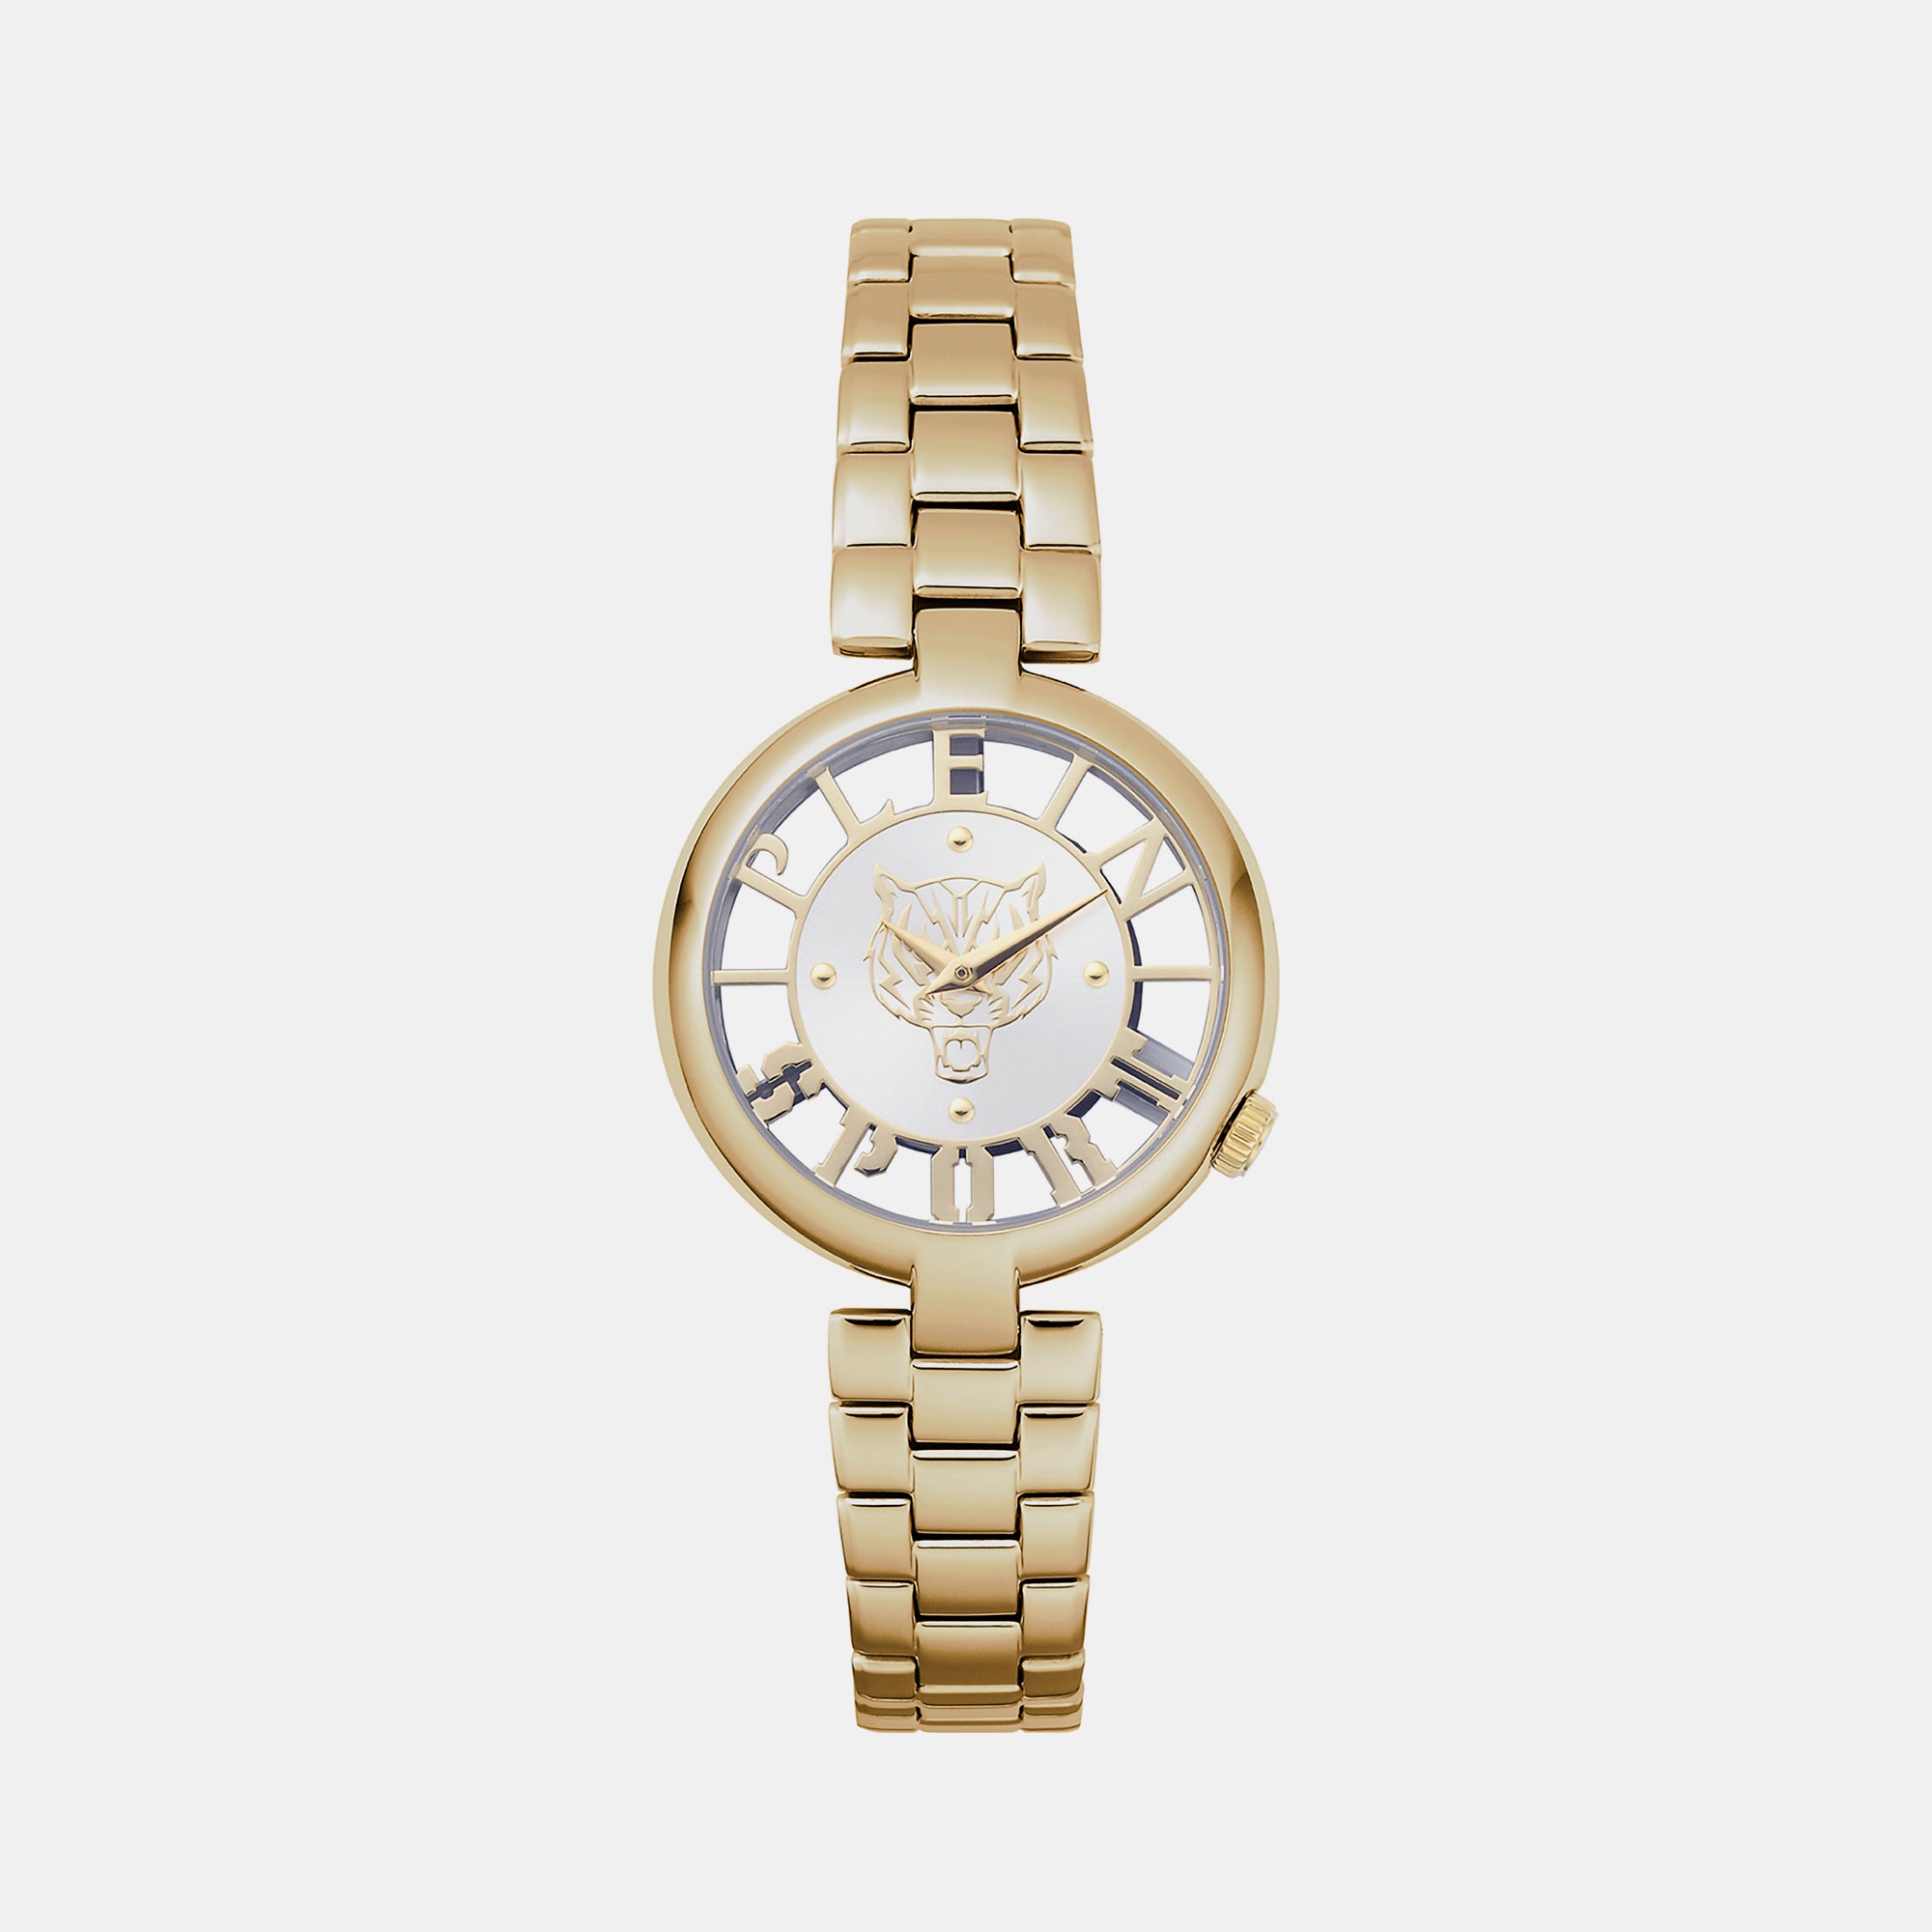 Gold Steel Automatic Luxe Design Stainless Watch For Couples Couples 41MM  Mechanical Ladies Wrist Watch With Montre Strap Perfect Gift RBSB From  Fashiontrendwatch, $132.07 | DHgate.Com